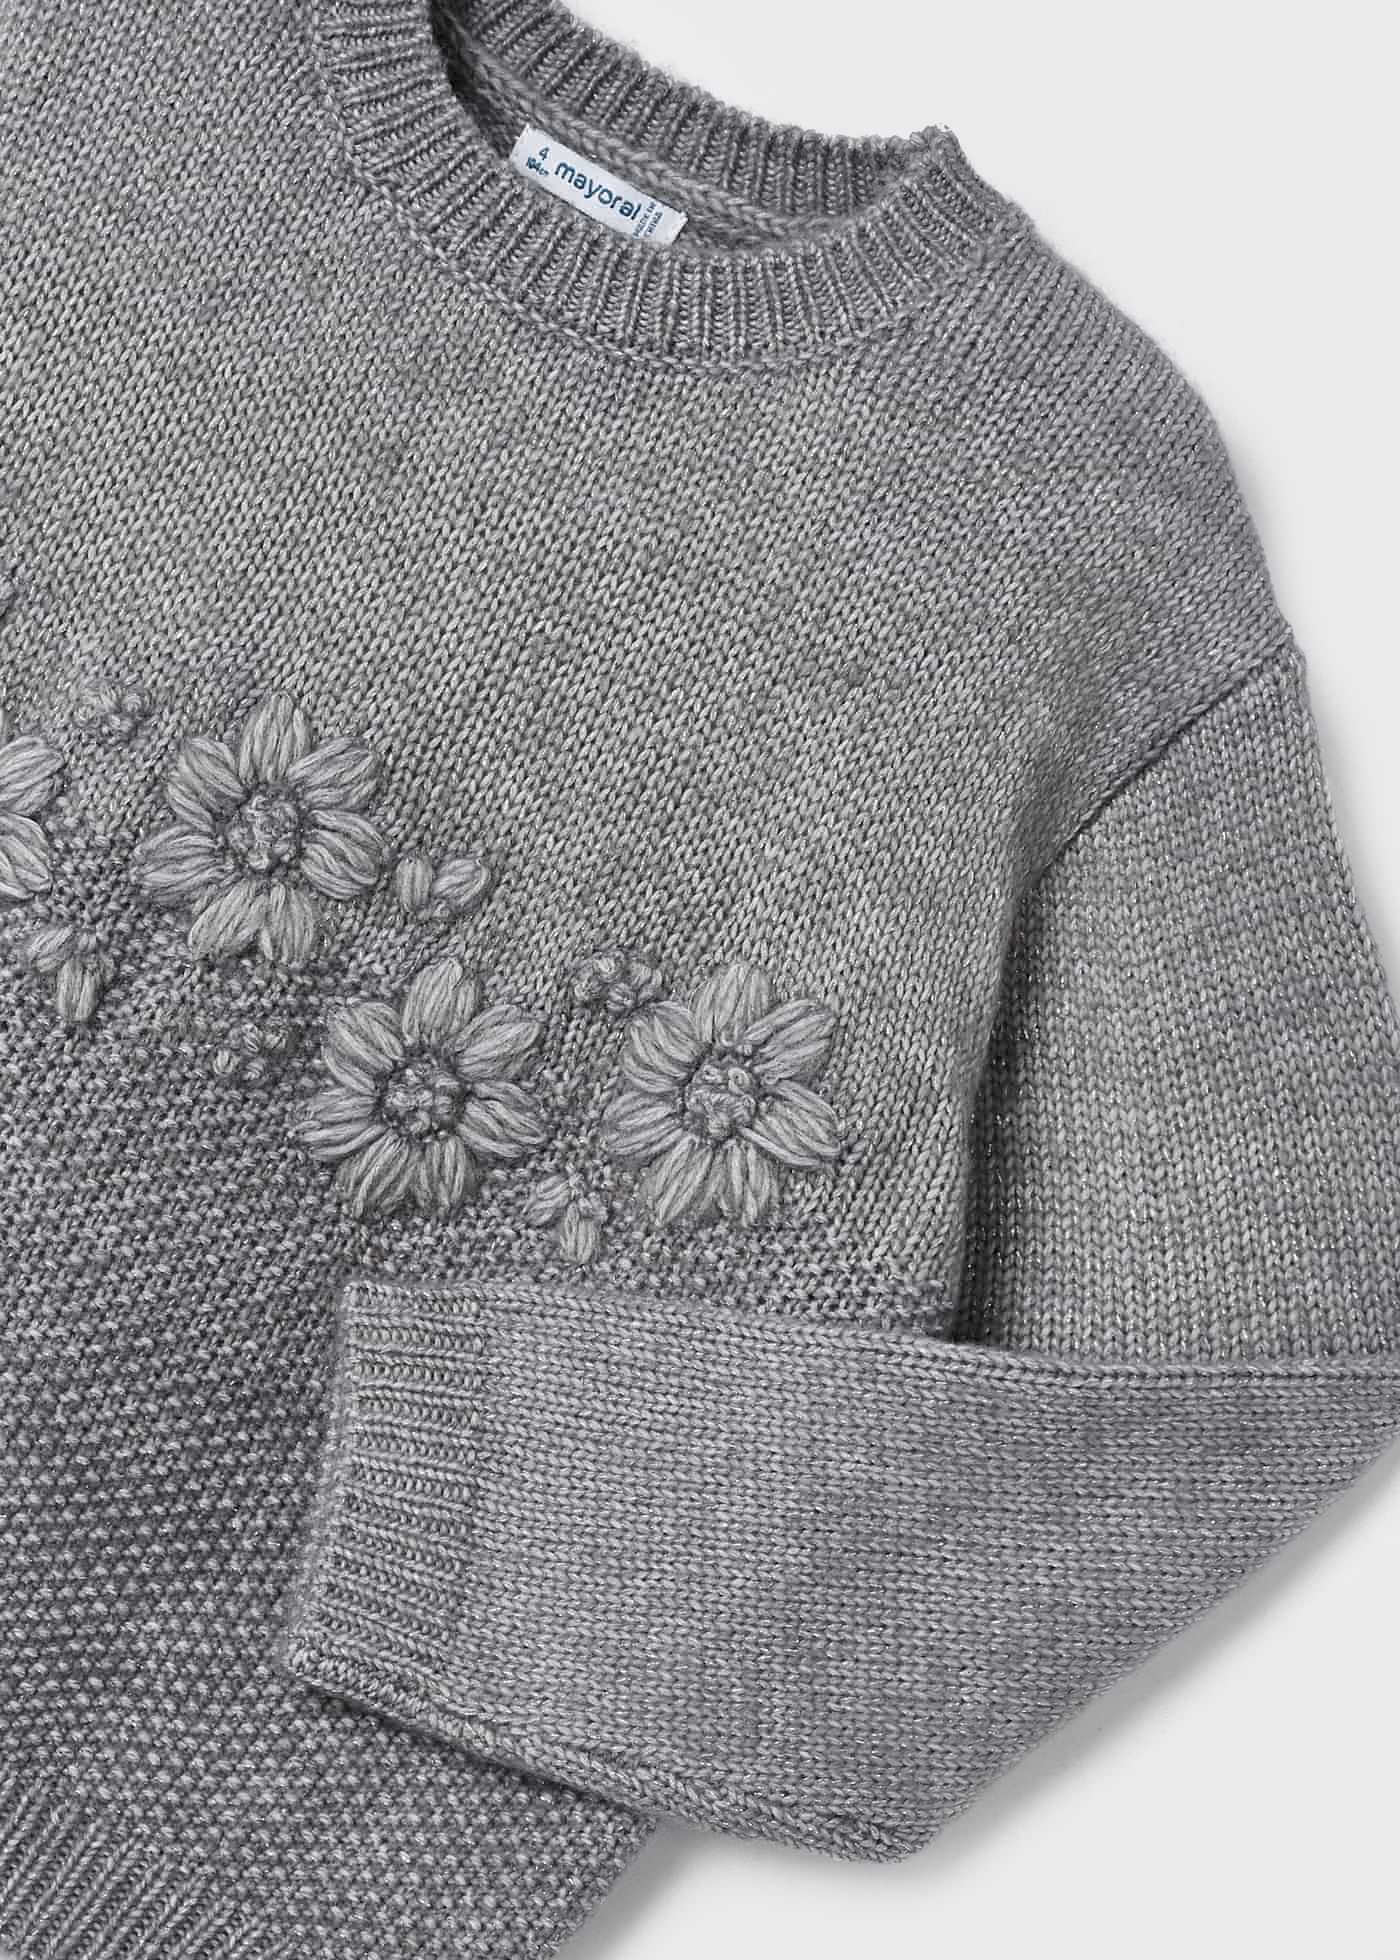 Wholesale Women's Knitwear Sweater Stone Embroidered Gray - 16799